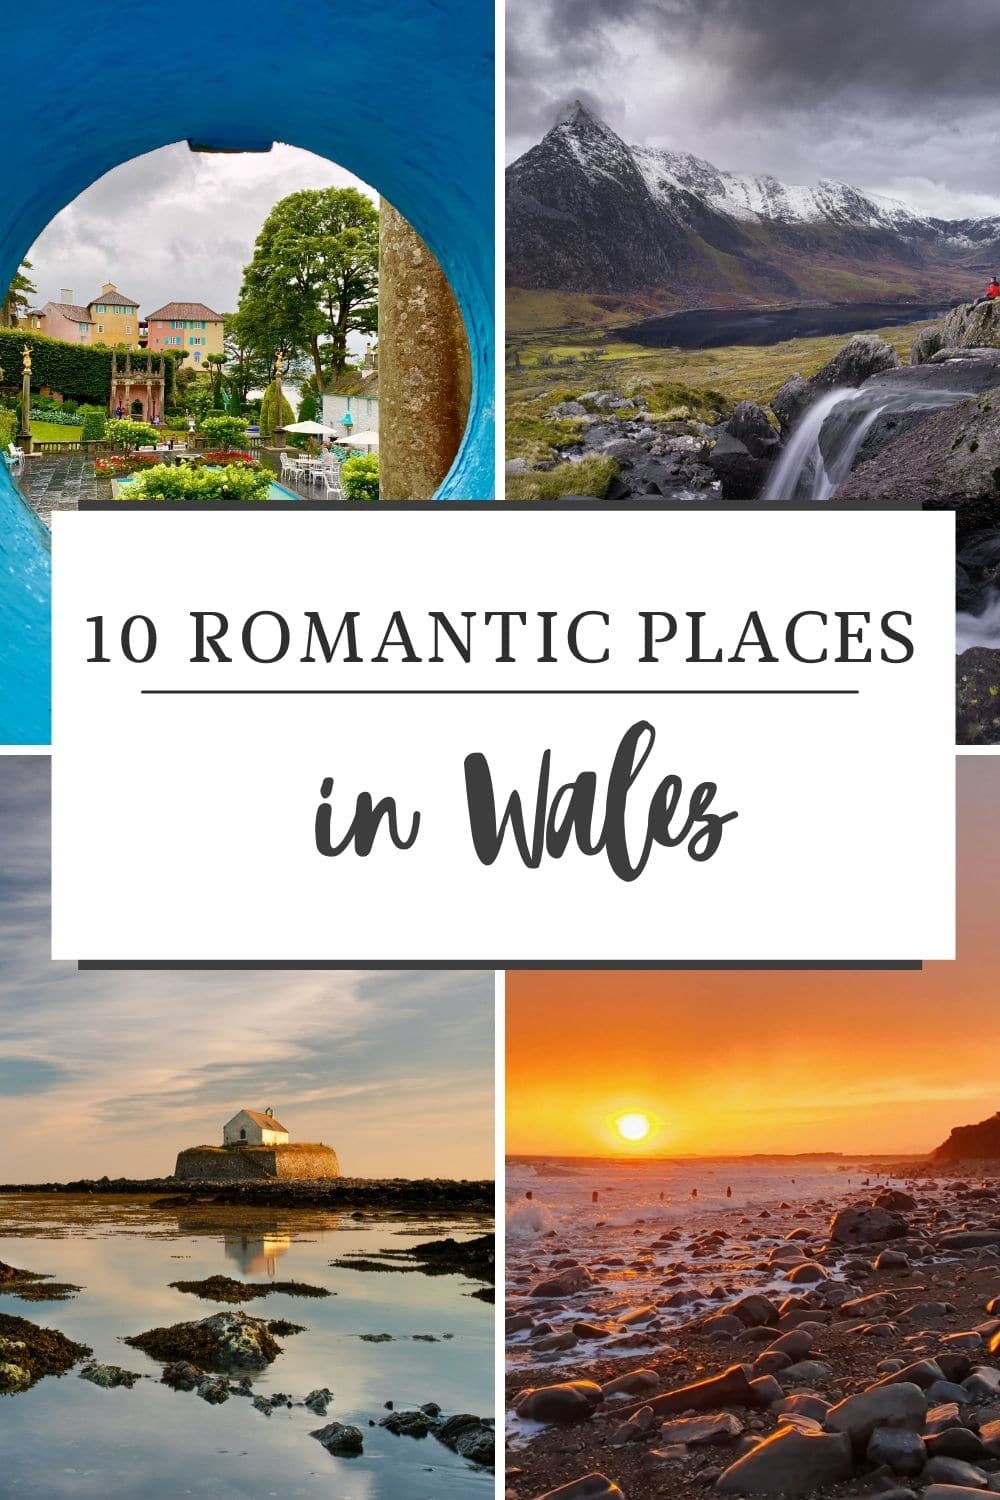 10 Best Places To Visit In Wales For romantic breaks in wales.